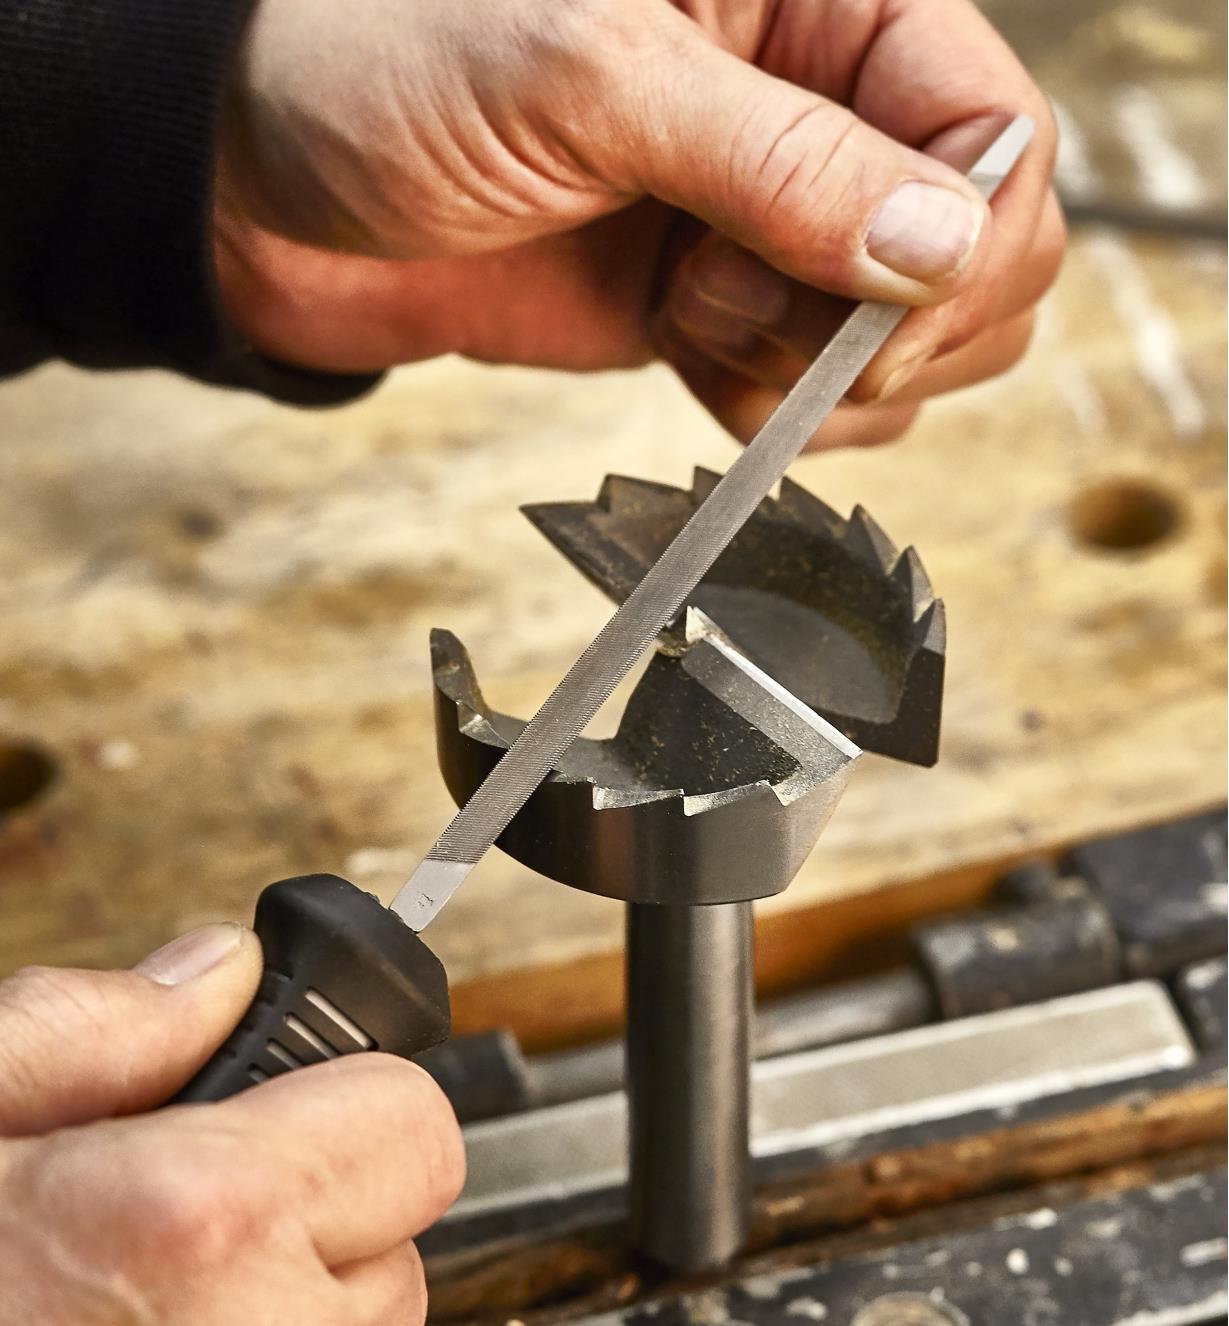 A woodworker uses a triangular slim file to sharpen a saw-tooth drill bit